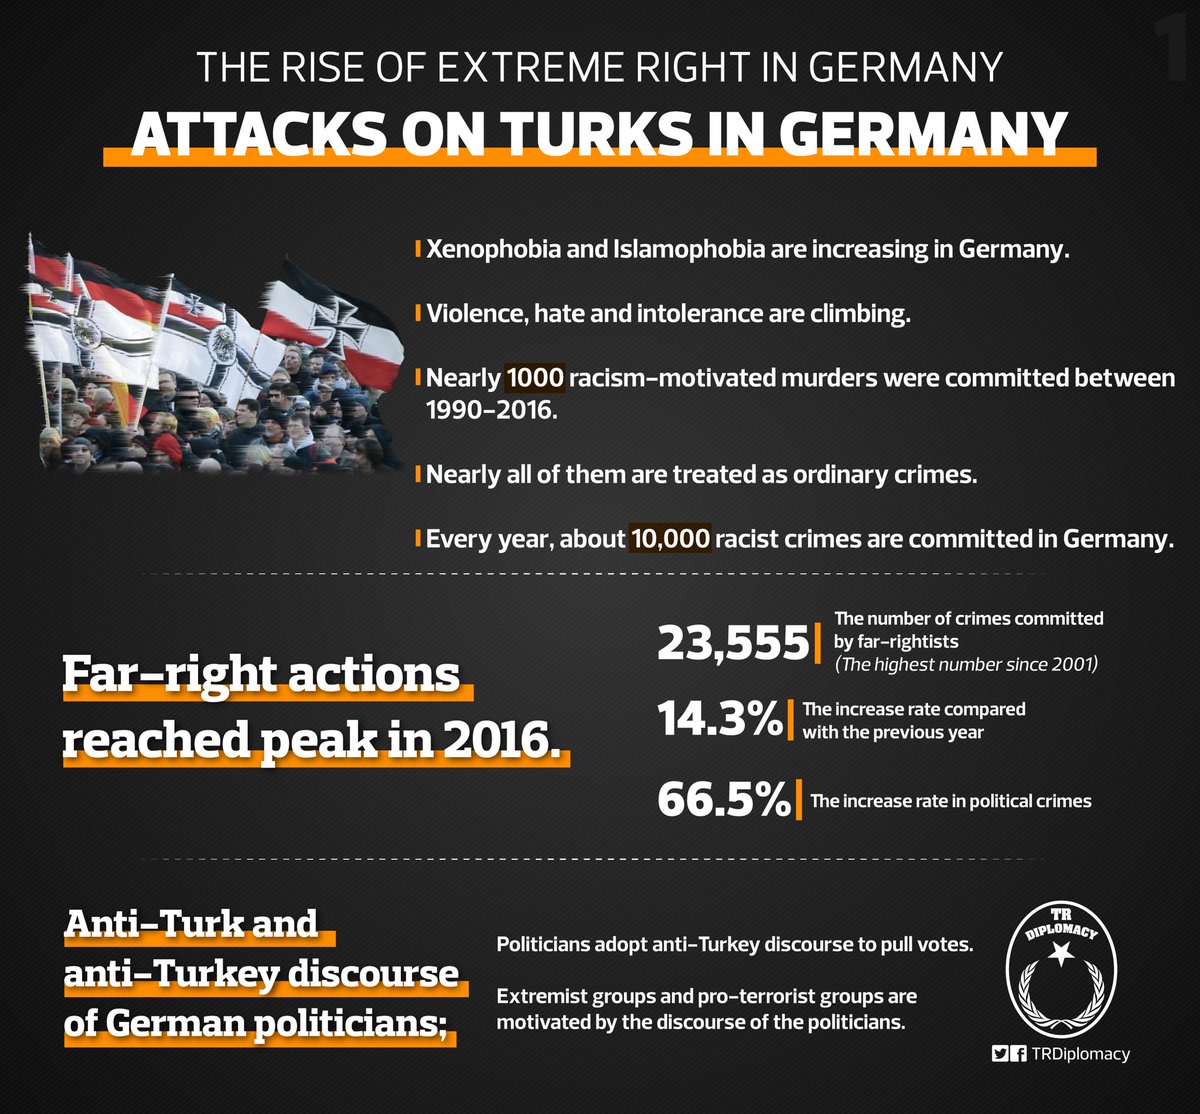 Increasing far-right movement and attacks on Turks in Germany